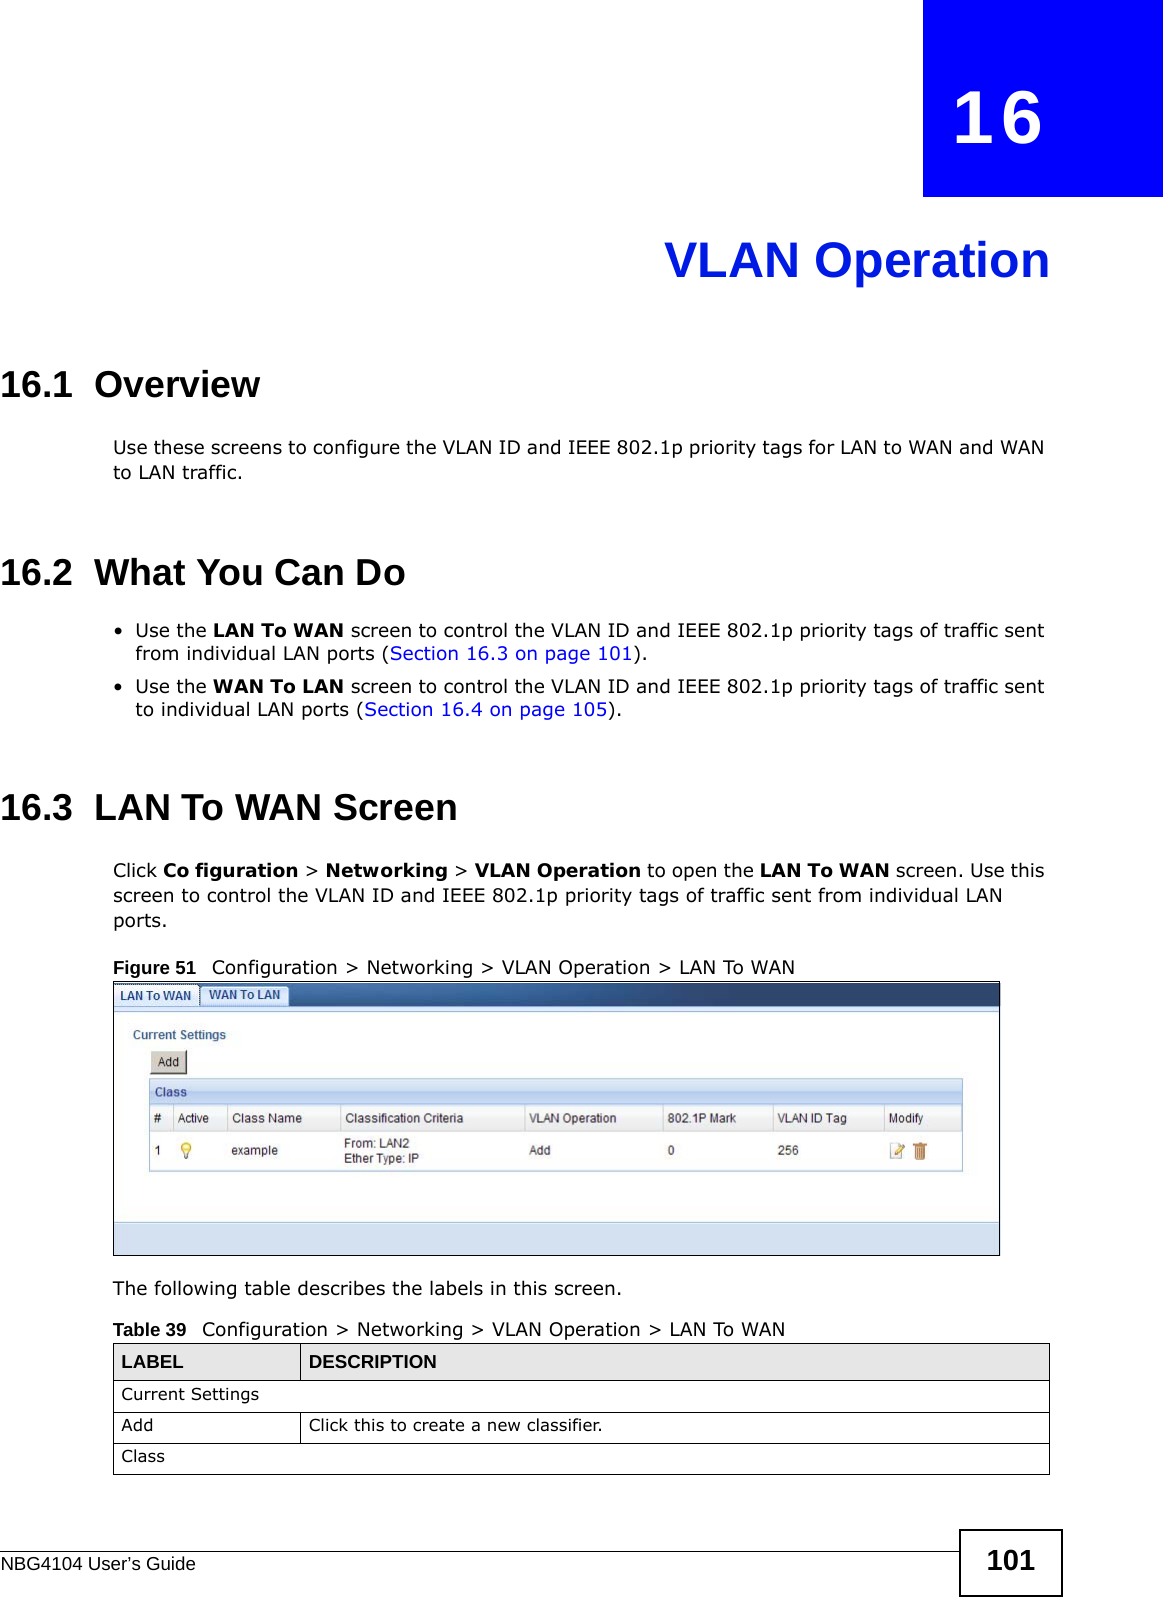 NBG4104 User’s Guide 101CHAPTER   16VLAN Operation16.1  OverviewUse these screens to configure the VLAN ID and IEEE 802.1p priority tags for LAN to WAN and WAN to LAN traffic. 16.2  What You Can Do•Use the LAN To WAN screen to control the VLAN ID and IEEE 802.1p priority tags of traffic sent from individual LAN ports (Section 16.3 on page 101).•Use the WAN To LAN screen to control the VLAN ID and IEEE 802.1p priority tags of traffic sent to individual LAN ports (Section 16.4 on page 105).16.3  LAN To WAN Screen Click Co figuration &gt; Networking &gt; VLAN Operation to open the LAN To WAN screen. Use this screen to control the VLAN ID and IEEE 802.1p priority tags of traffic sent from individual LAN ports.Figure 51   Configuration &gt; Networking &gt; VLAN Operation &gt; LAN To WANThe following table describes the labels in this screen. Table 39   Configuration &gt; Networking &gt; VLAN Operation &gt; LAN To WANLABEL DESCRIPTIONCurrent SettingsAdd Click this to create a new classifier.Class